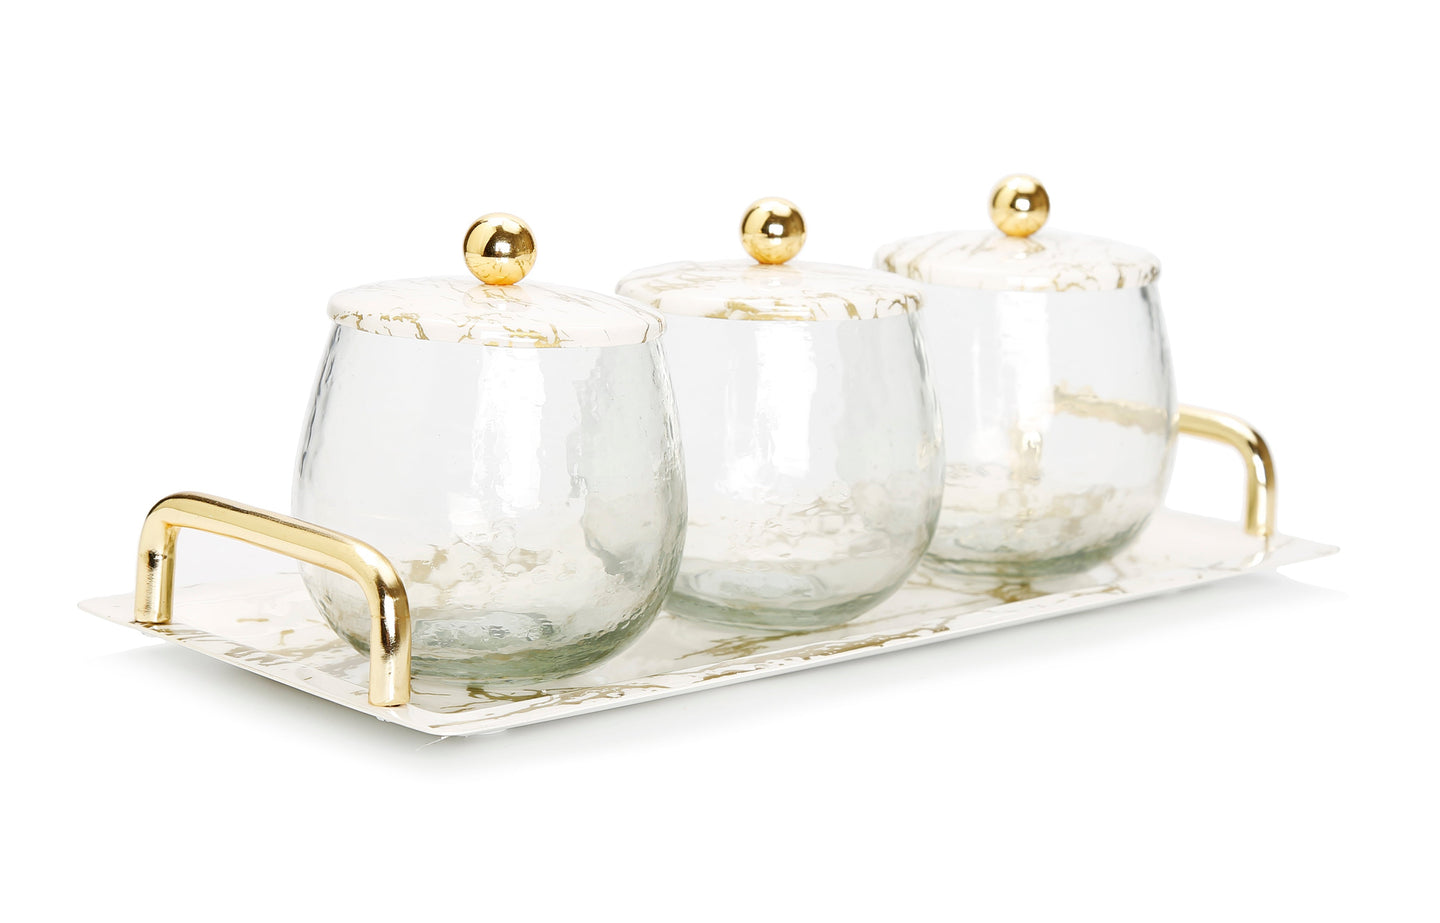 Gold Marble 3 Bowl Serving Dish with Gold Ball Design